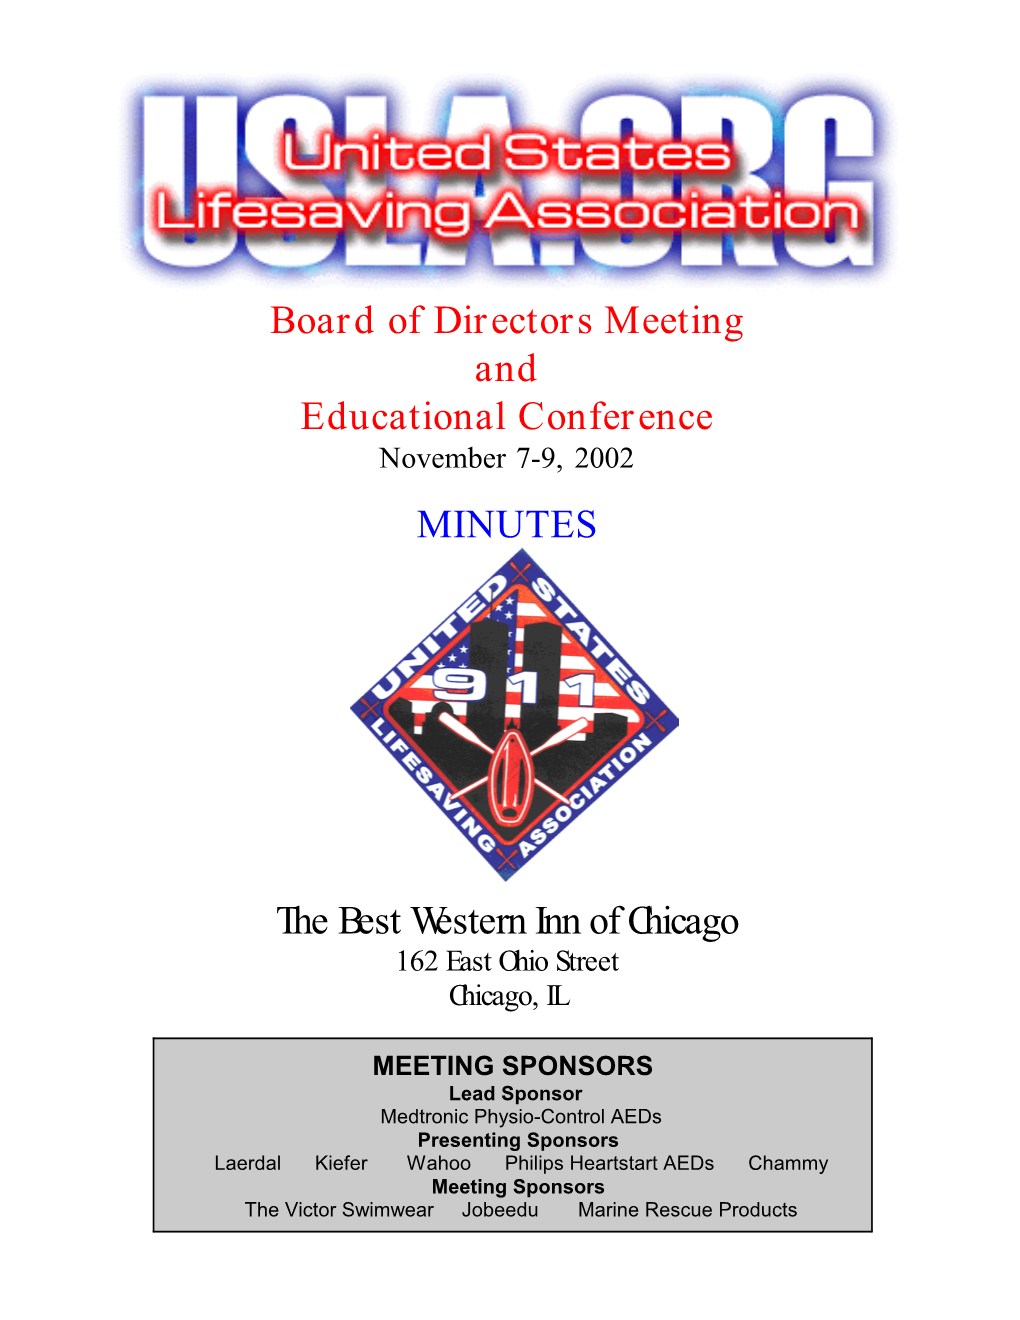 Board of Directors Meeting and Educational Conference November 7-9, 2002 MINUTES